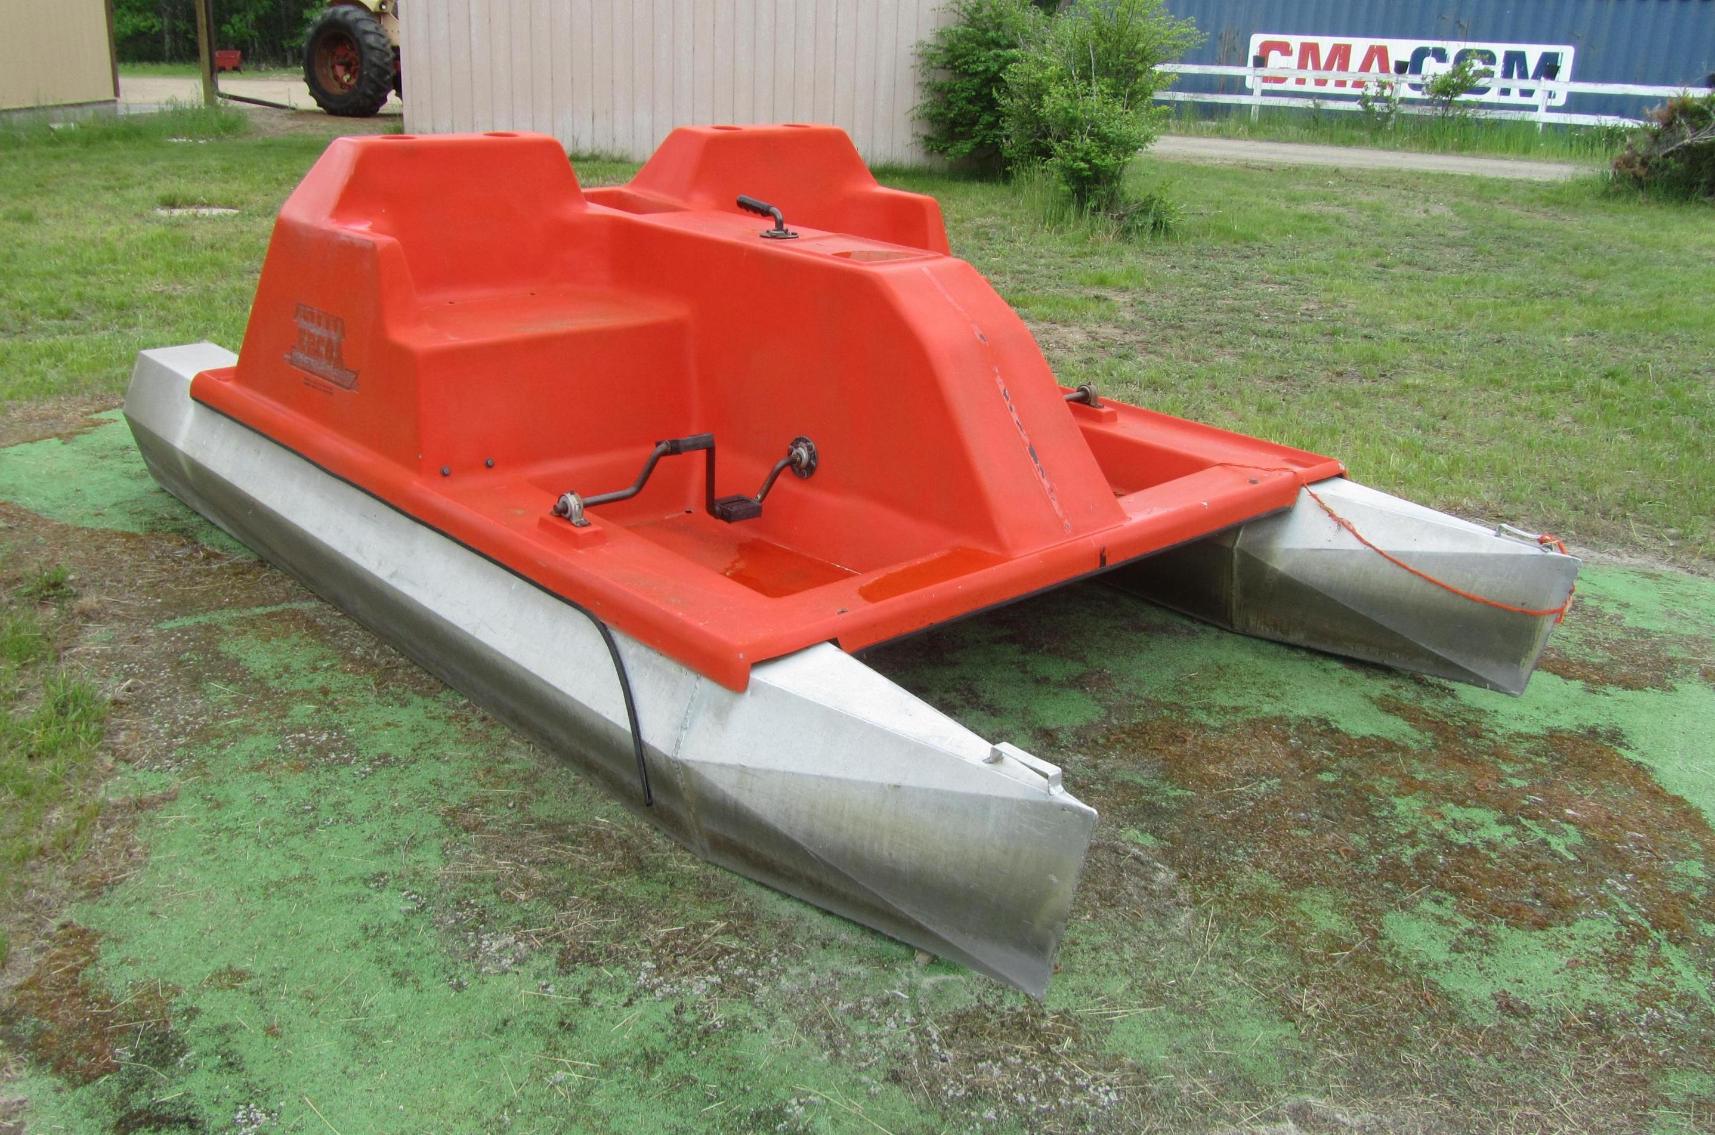 Ideal Corners Late June Consignment Auction, Pequot Lakes, MN